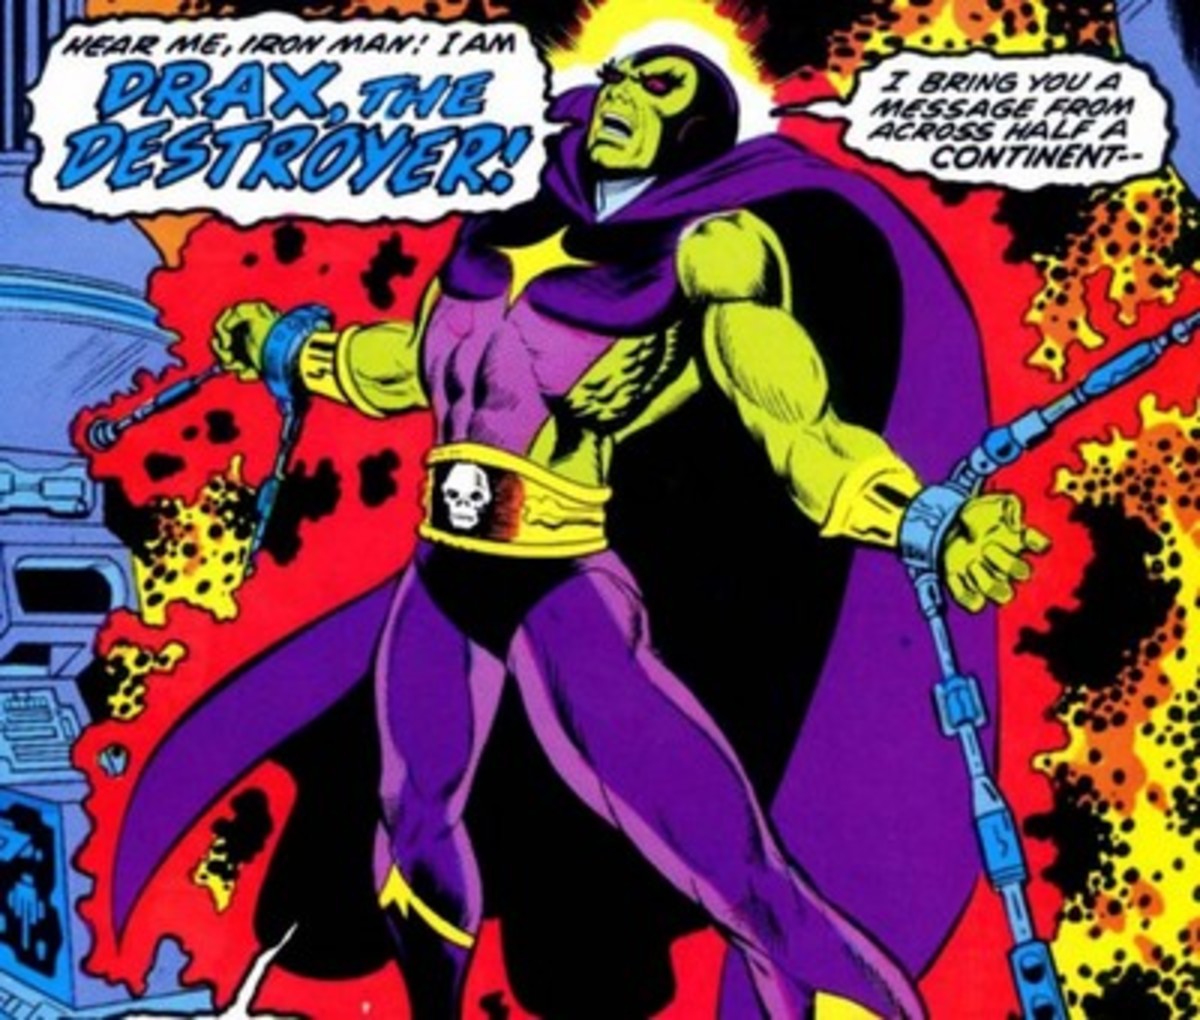 Drax as he originally appeared